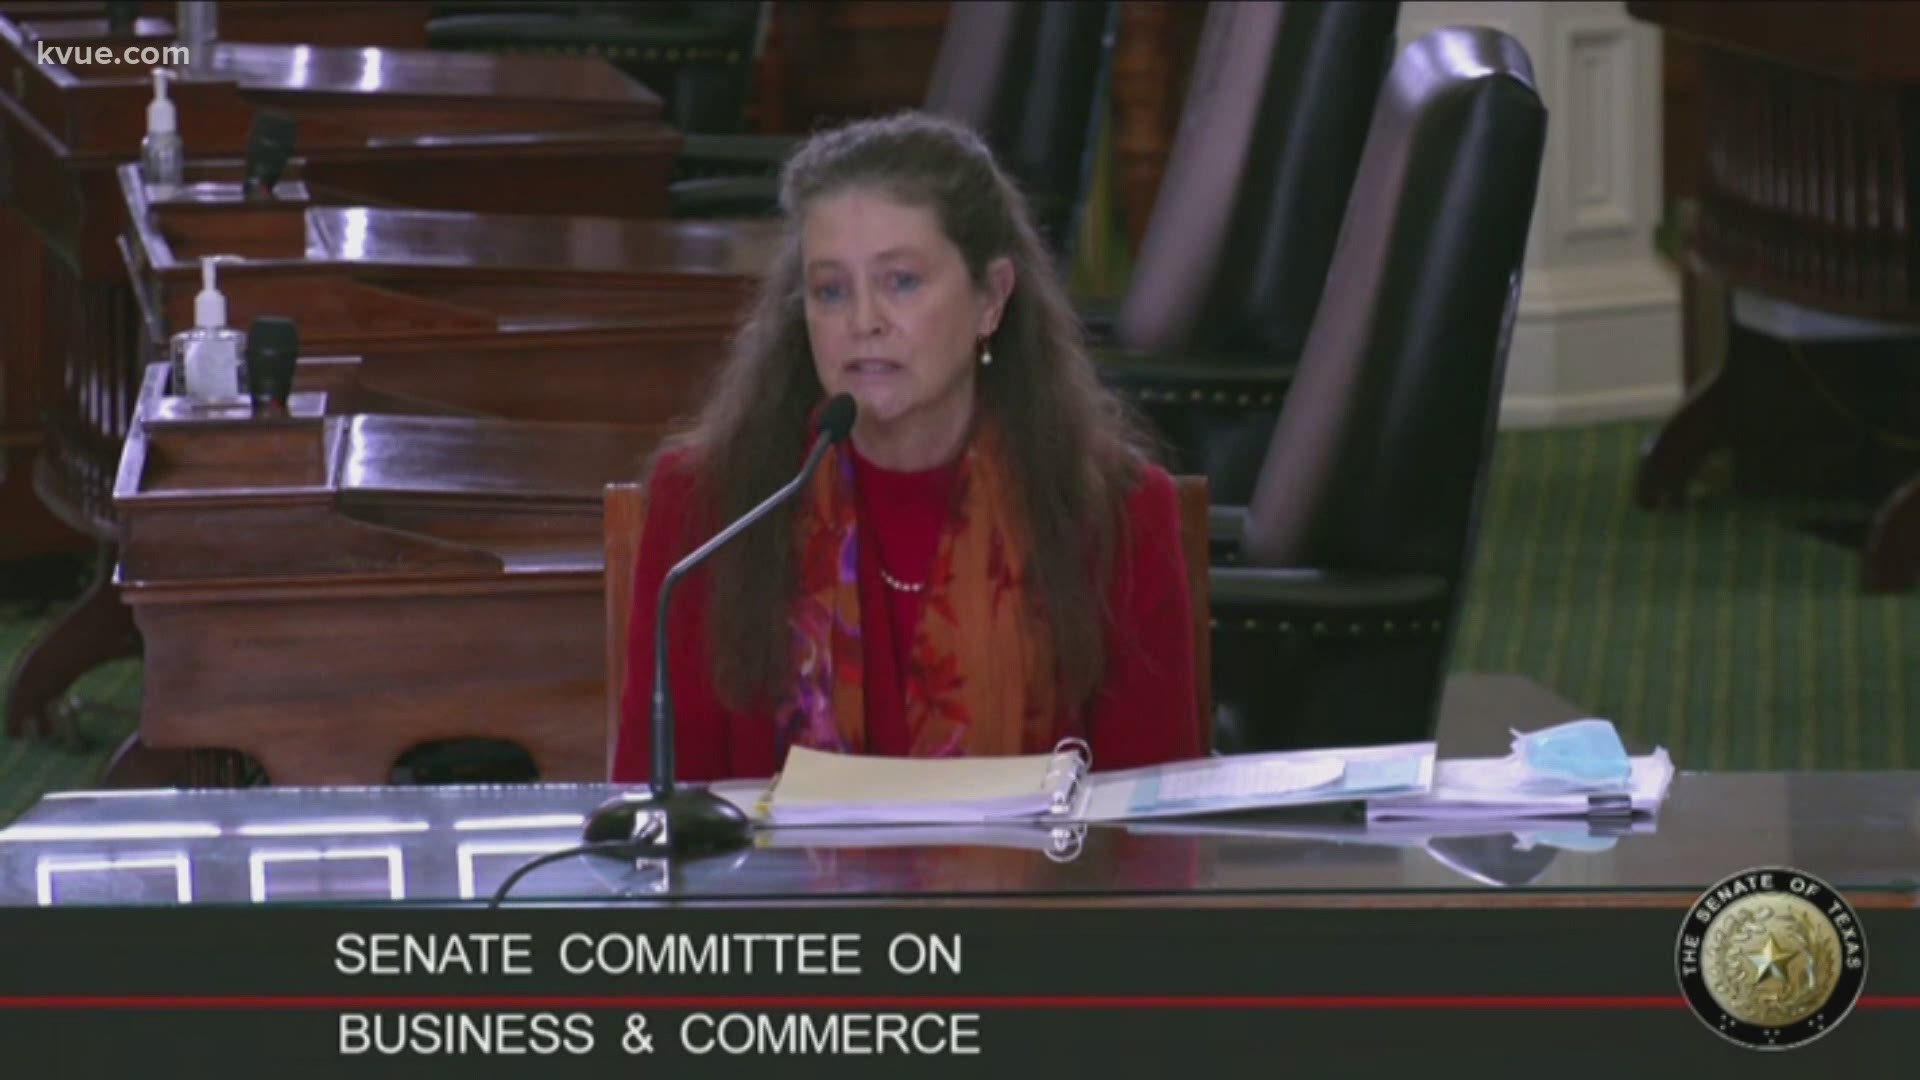 Texas energy companies continue to face questions over the winter outages. Today, Austin Energy testified in the Texas Senate.